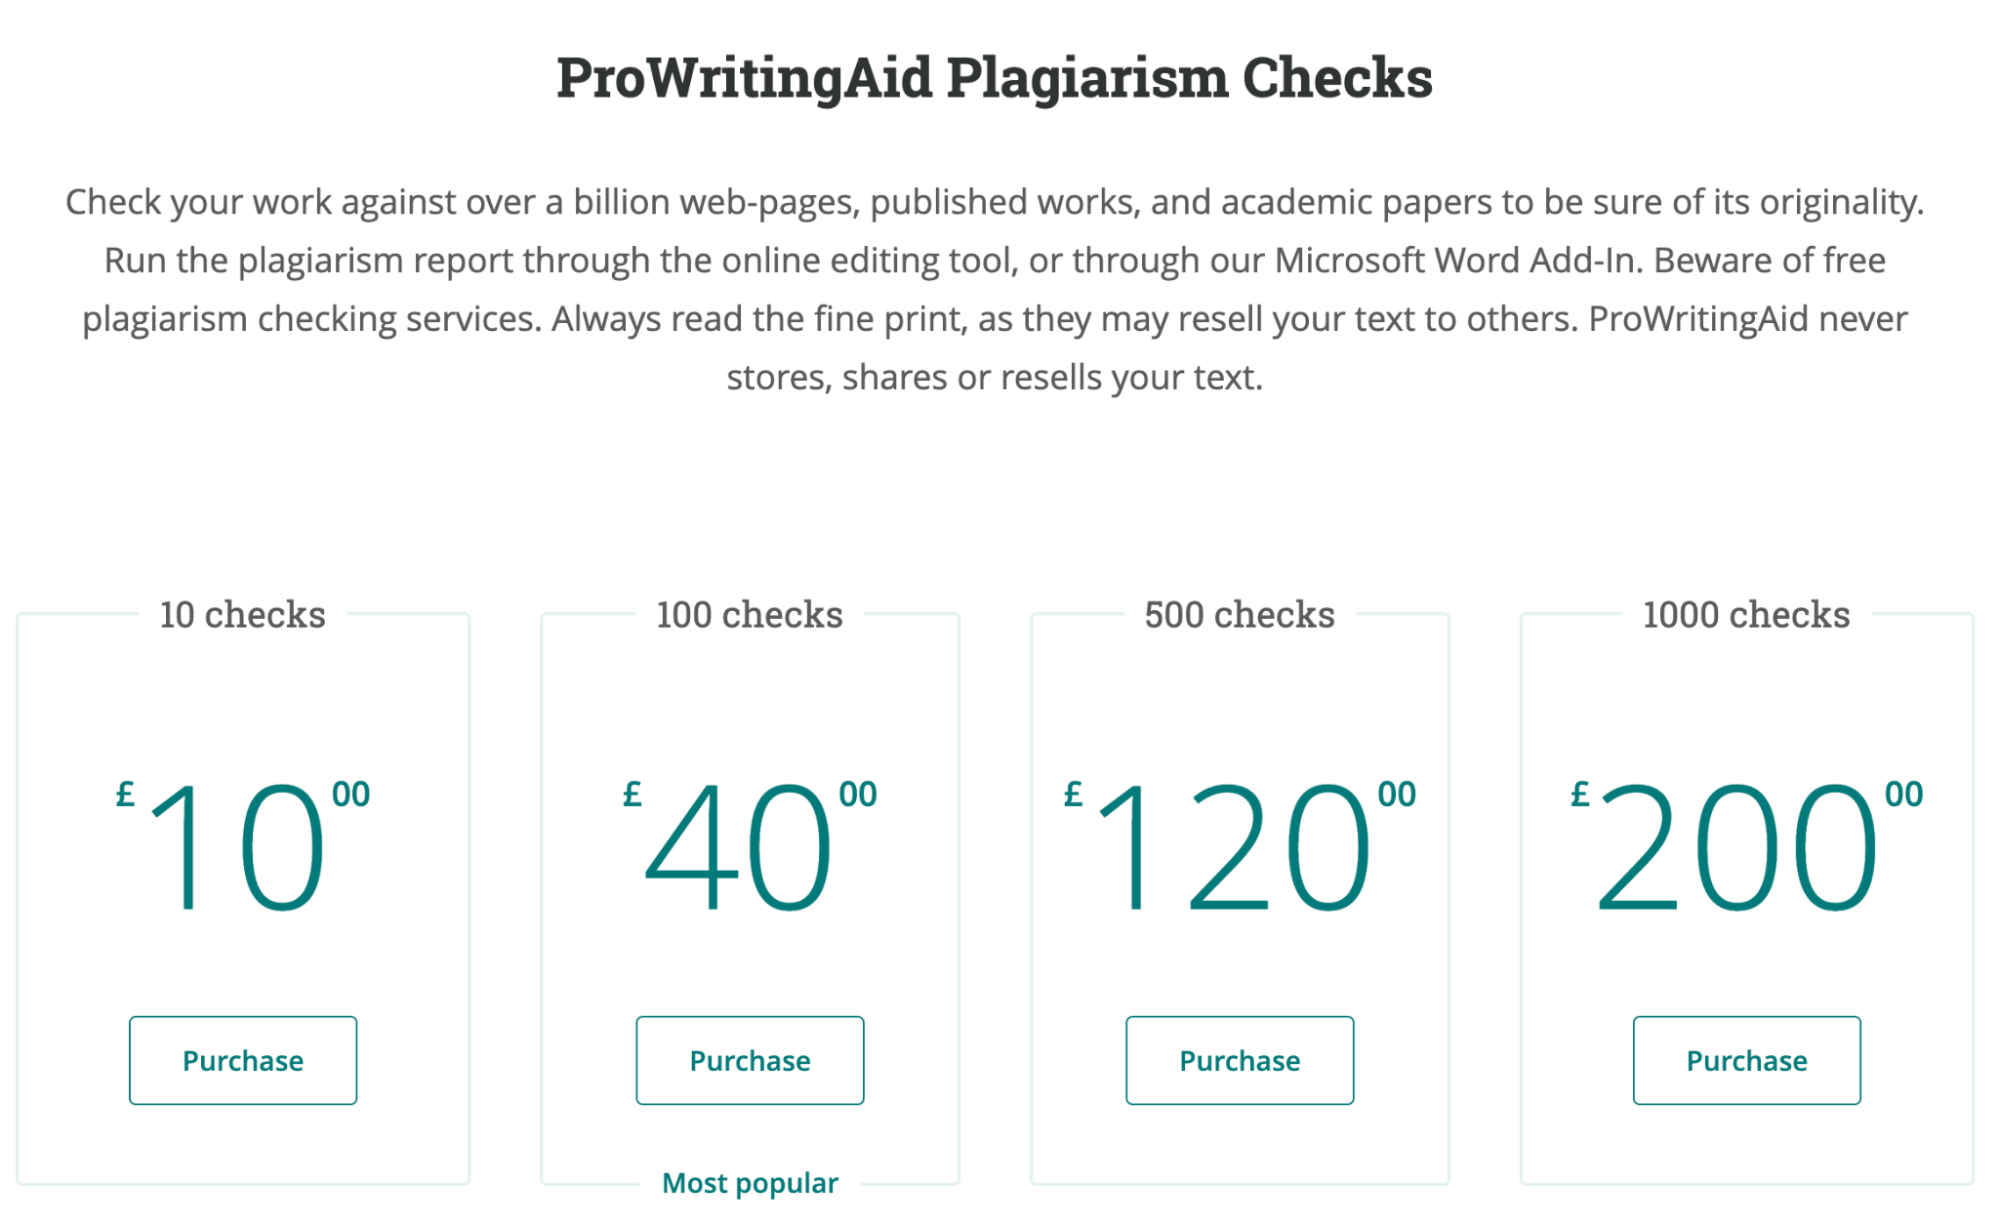 ProWritingAid's plagiarism checker pricing
